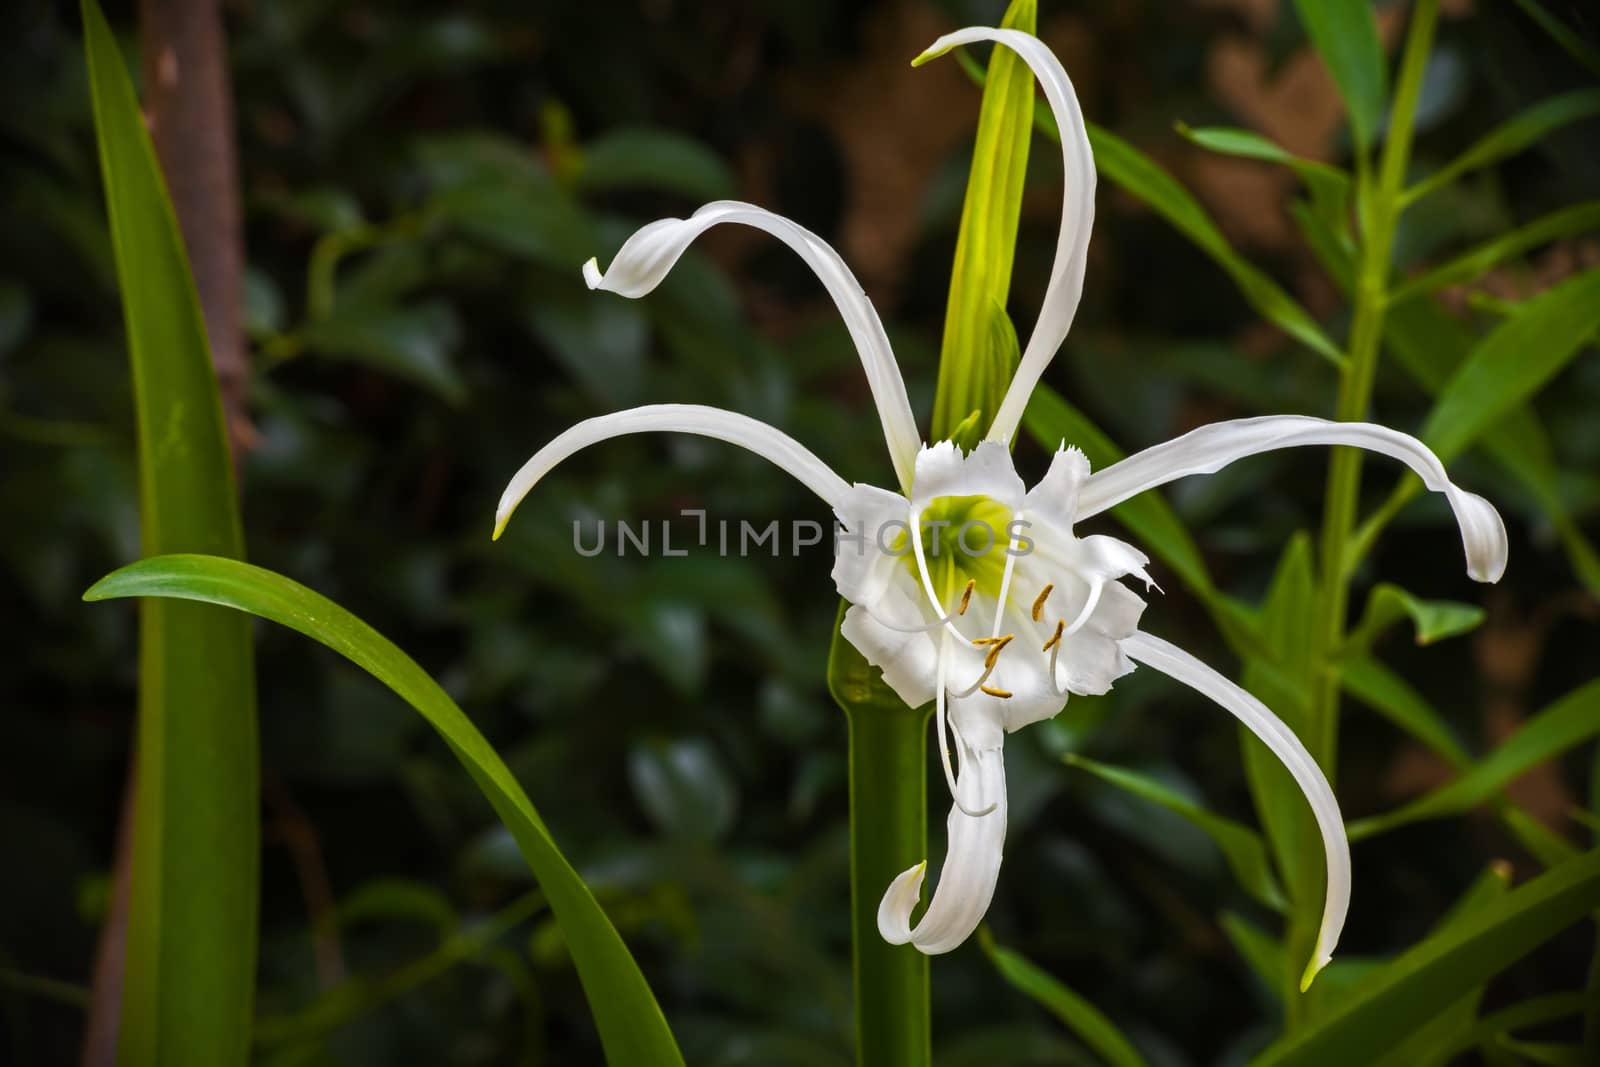 White Spider Lilly 2825 by kobus_peche